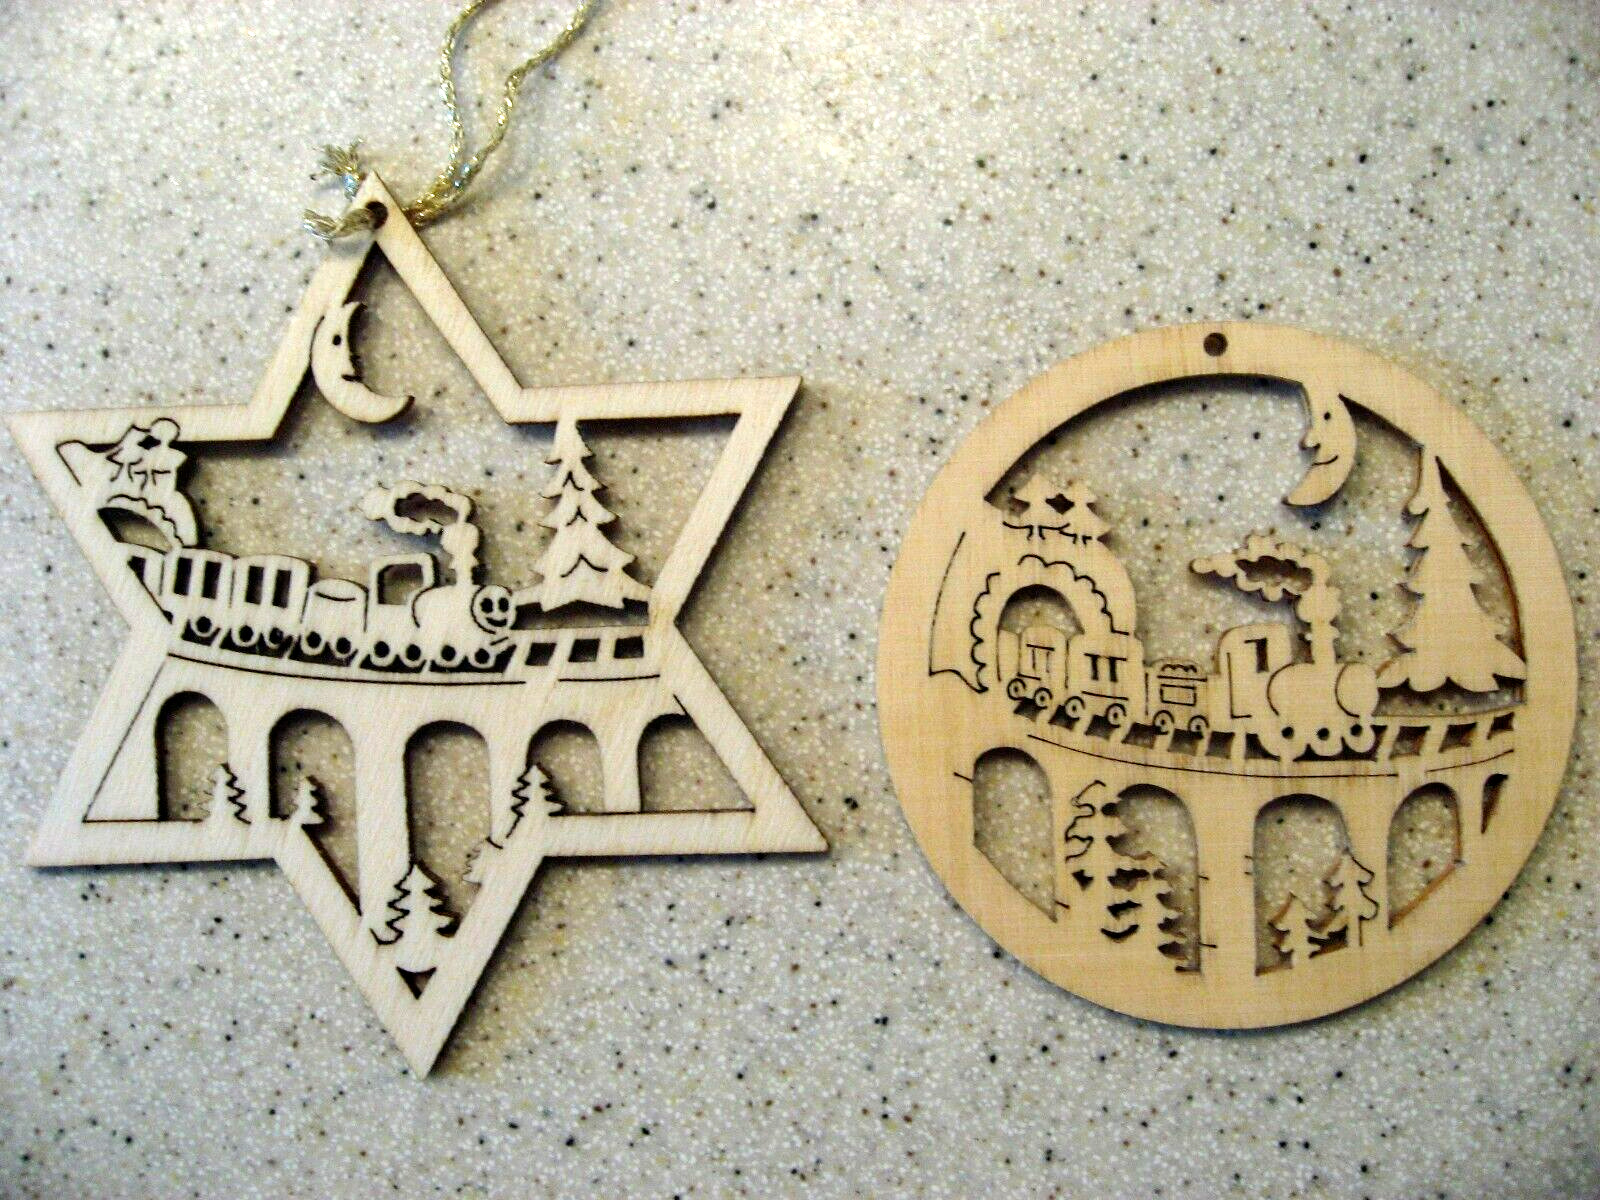 Vtg Lot of 2 Laser Cut Wood Christmas Ornaments with Train Scene Star & Round